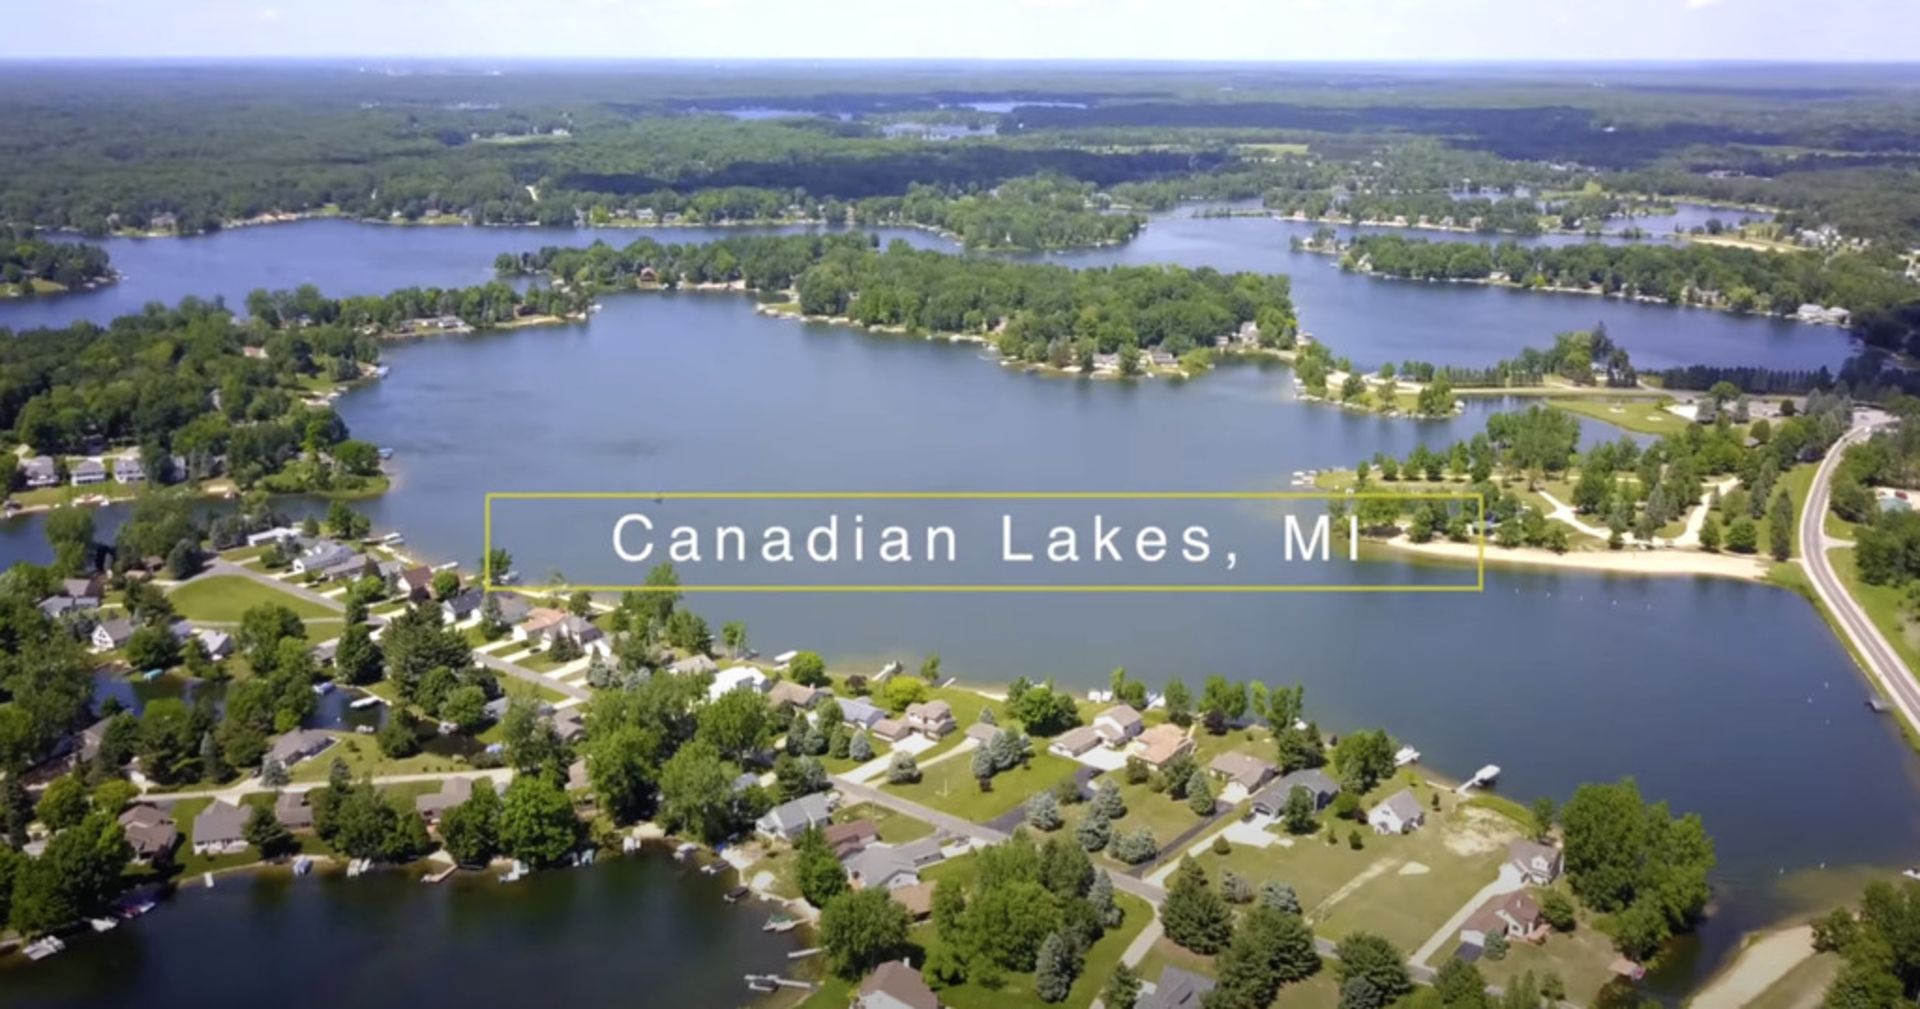 Build Your Dream Retreat in Peaceful Canadian Lakes, Michigan! - Image 11 of 14